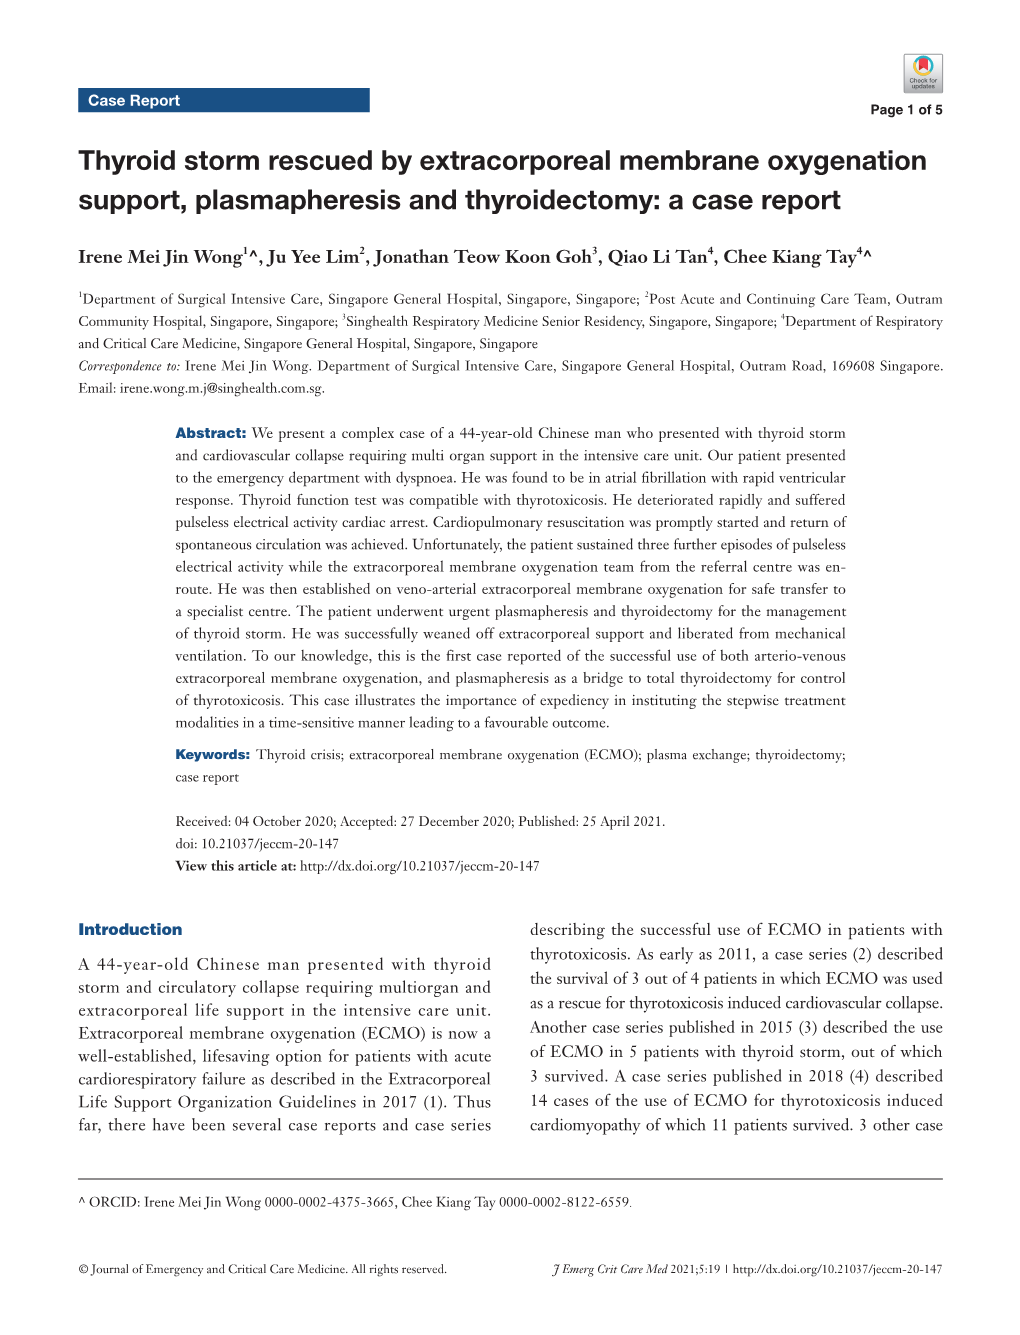 Thyroid Storm Rescued by Extracorporeal Membrane Oxygenation Support, Plasmapheresis and Thyroidectomy: a Case Report